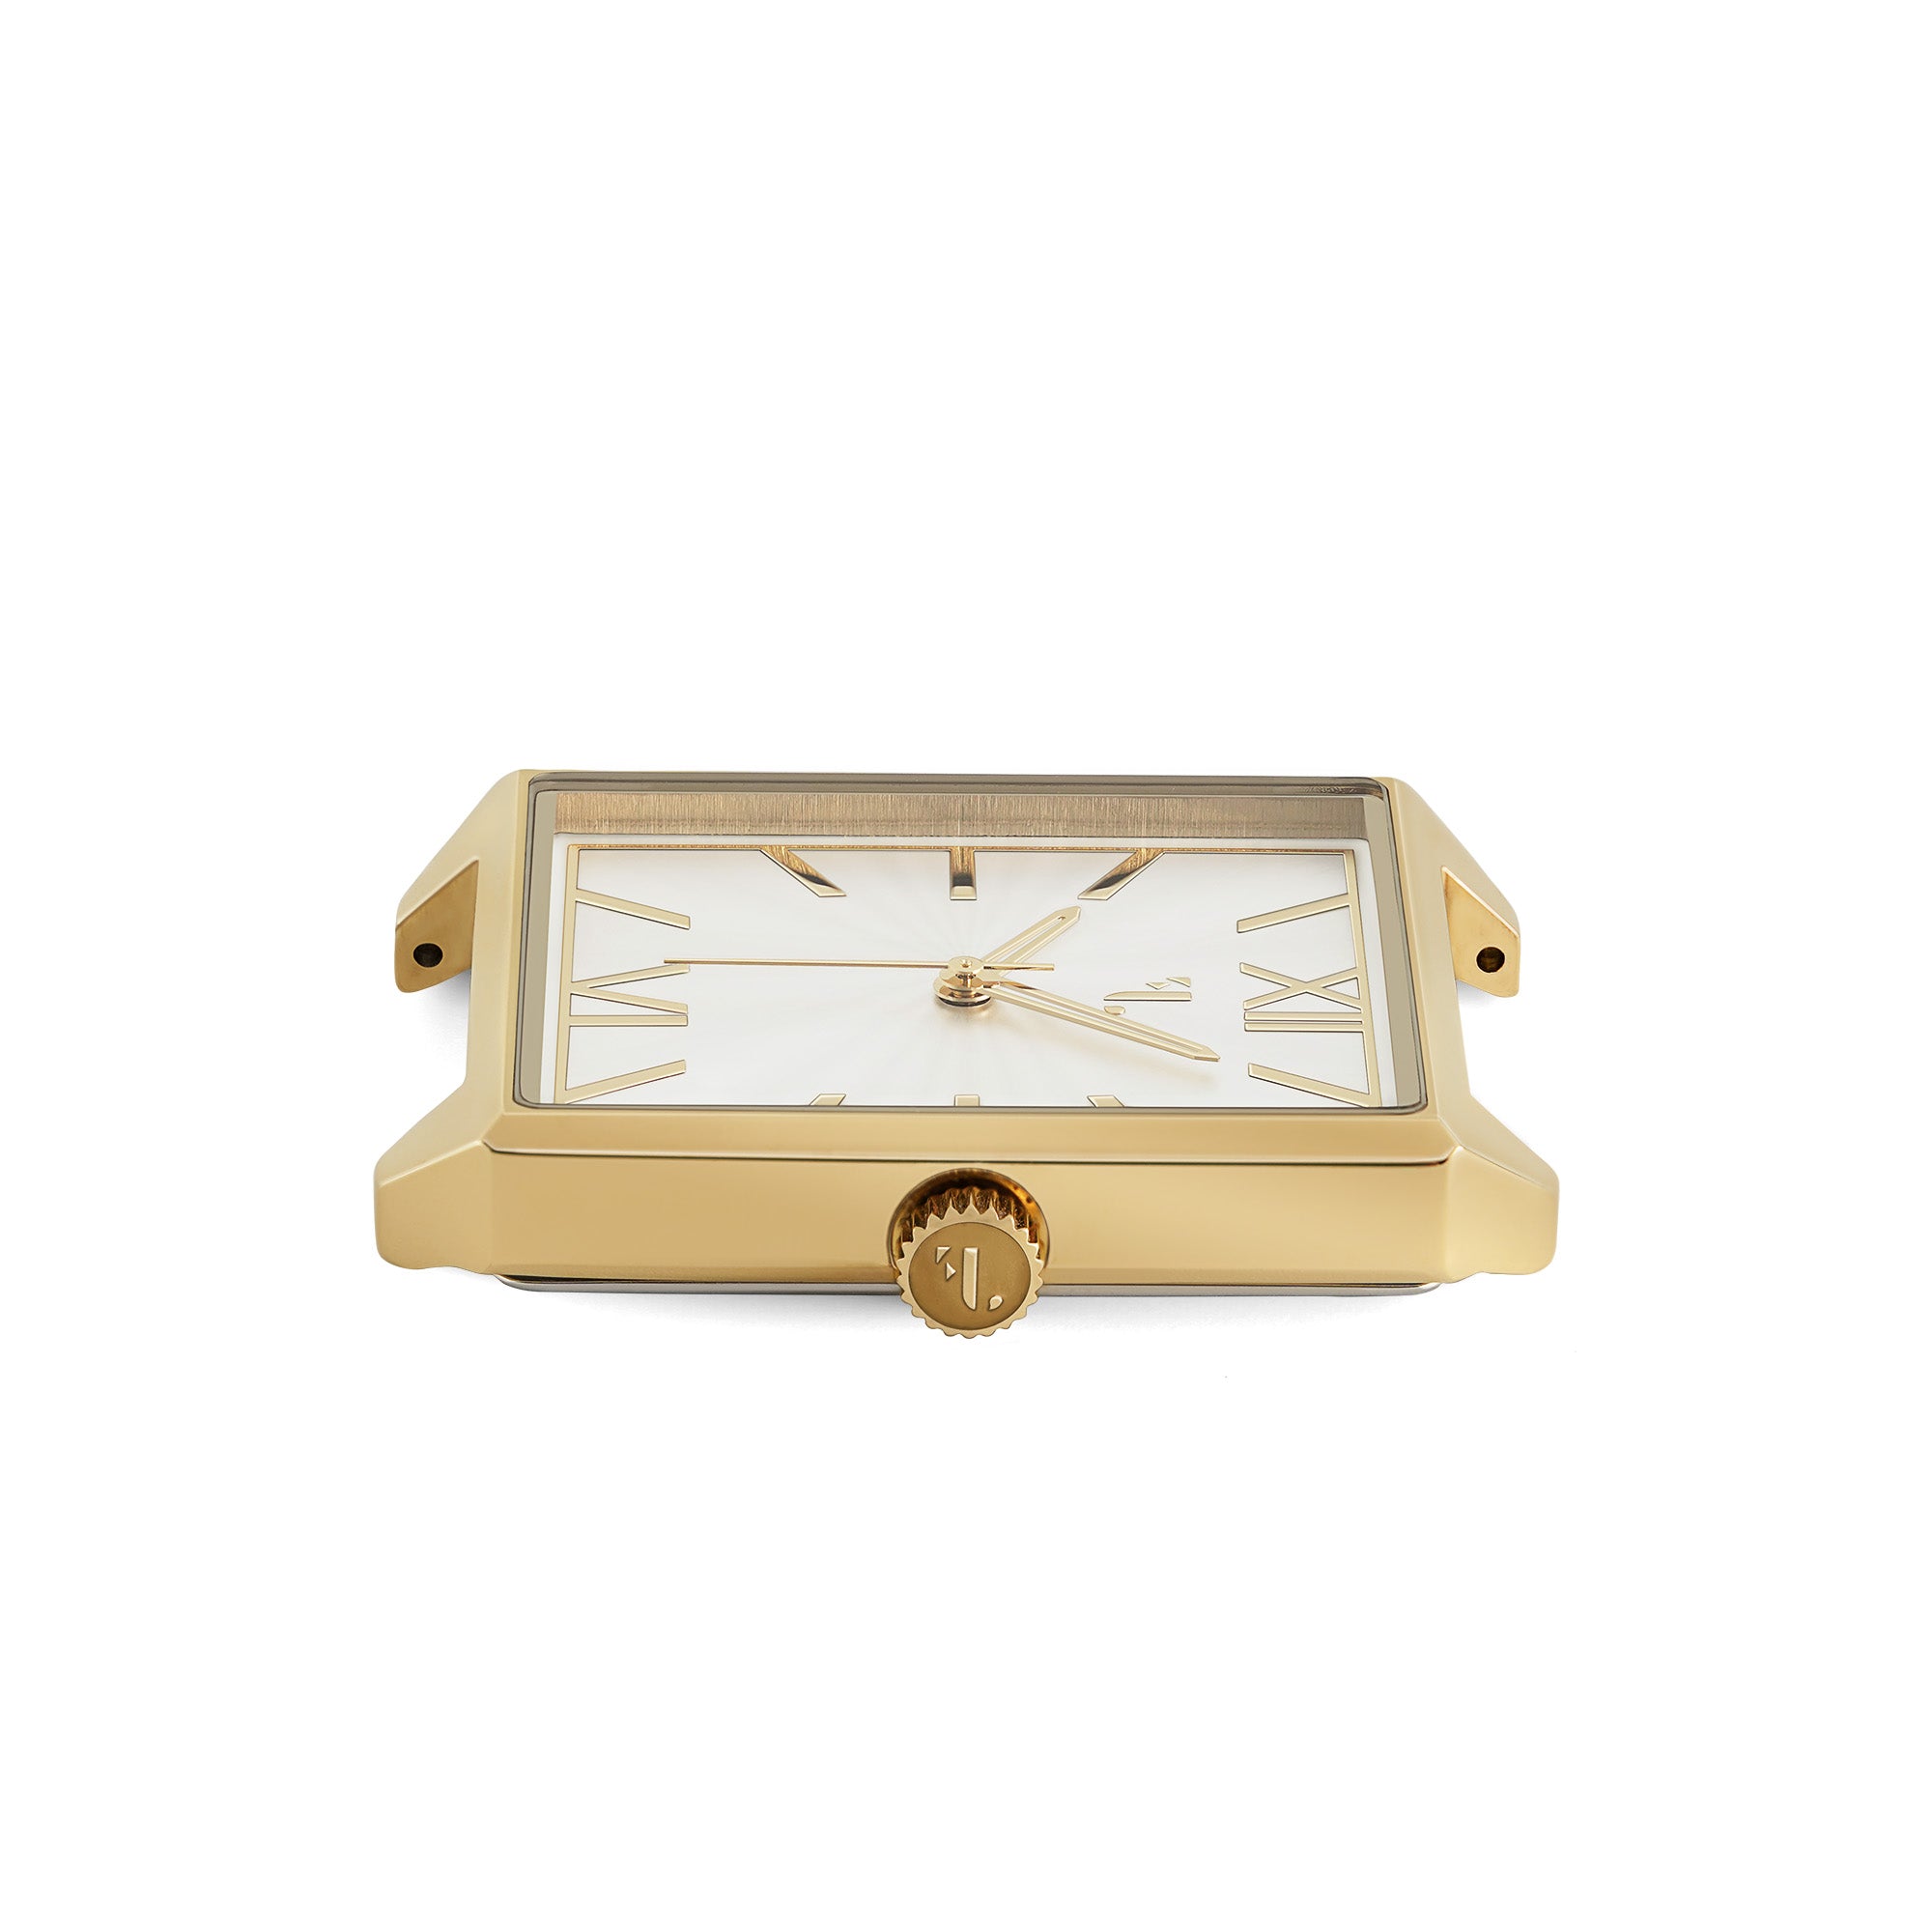 Prati watch. It is made of a square 14k gold plated case and a shiny silver dial. It is the ideal watch for a man, with its three hands, its quartz mechanism, its water resistance and its 2 year warranty.